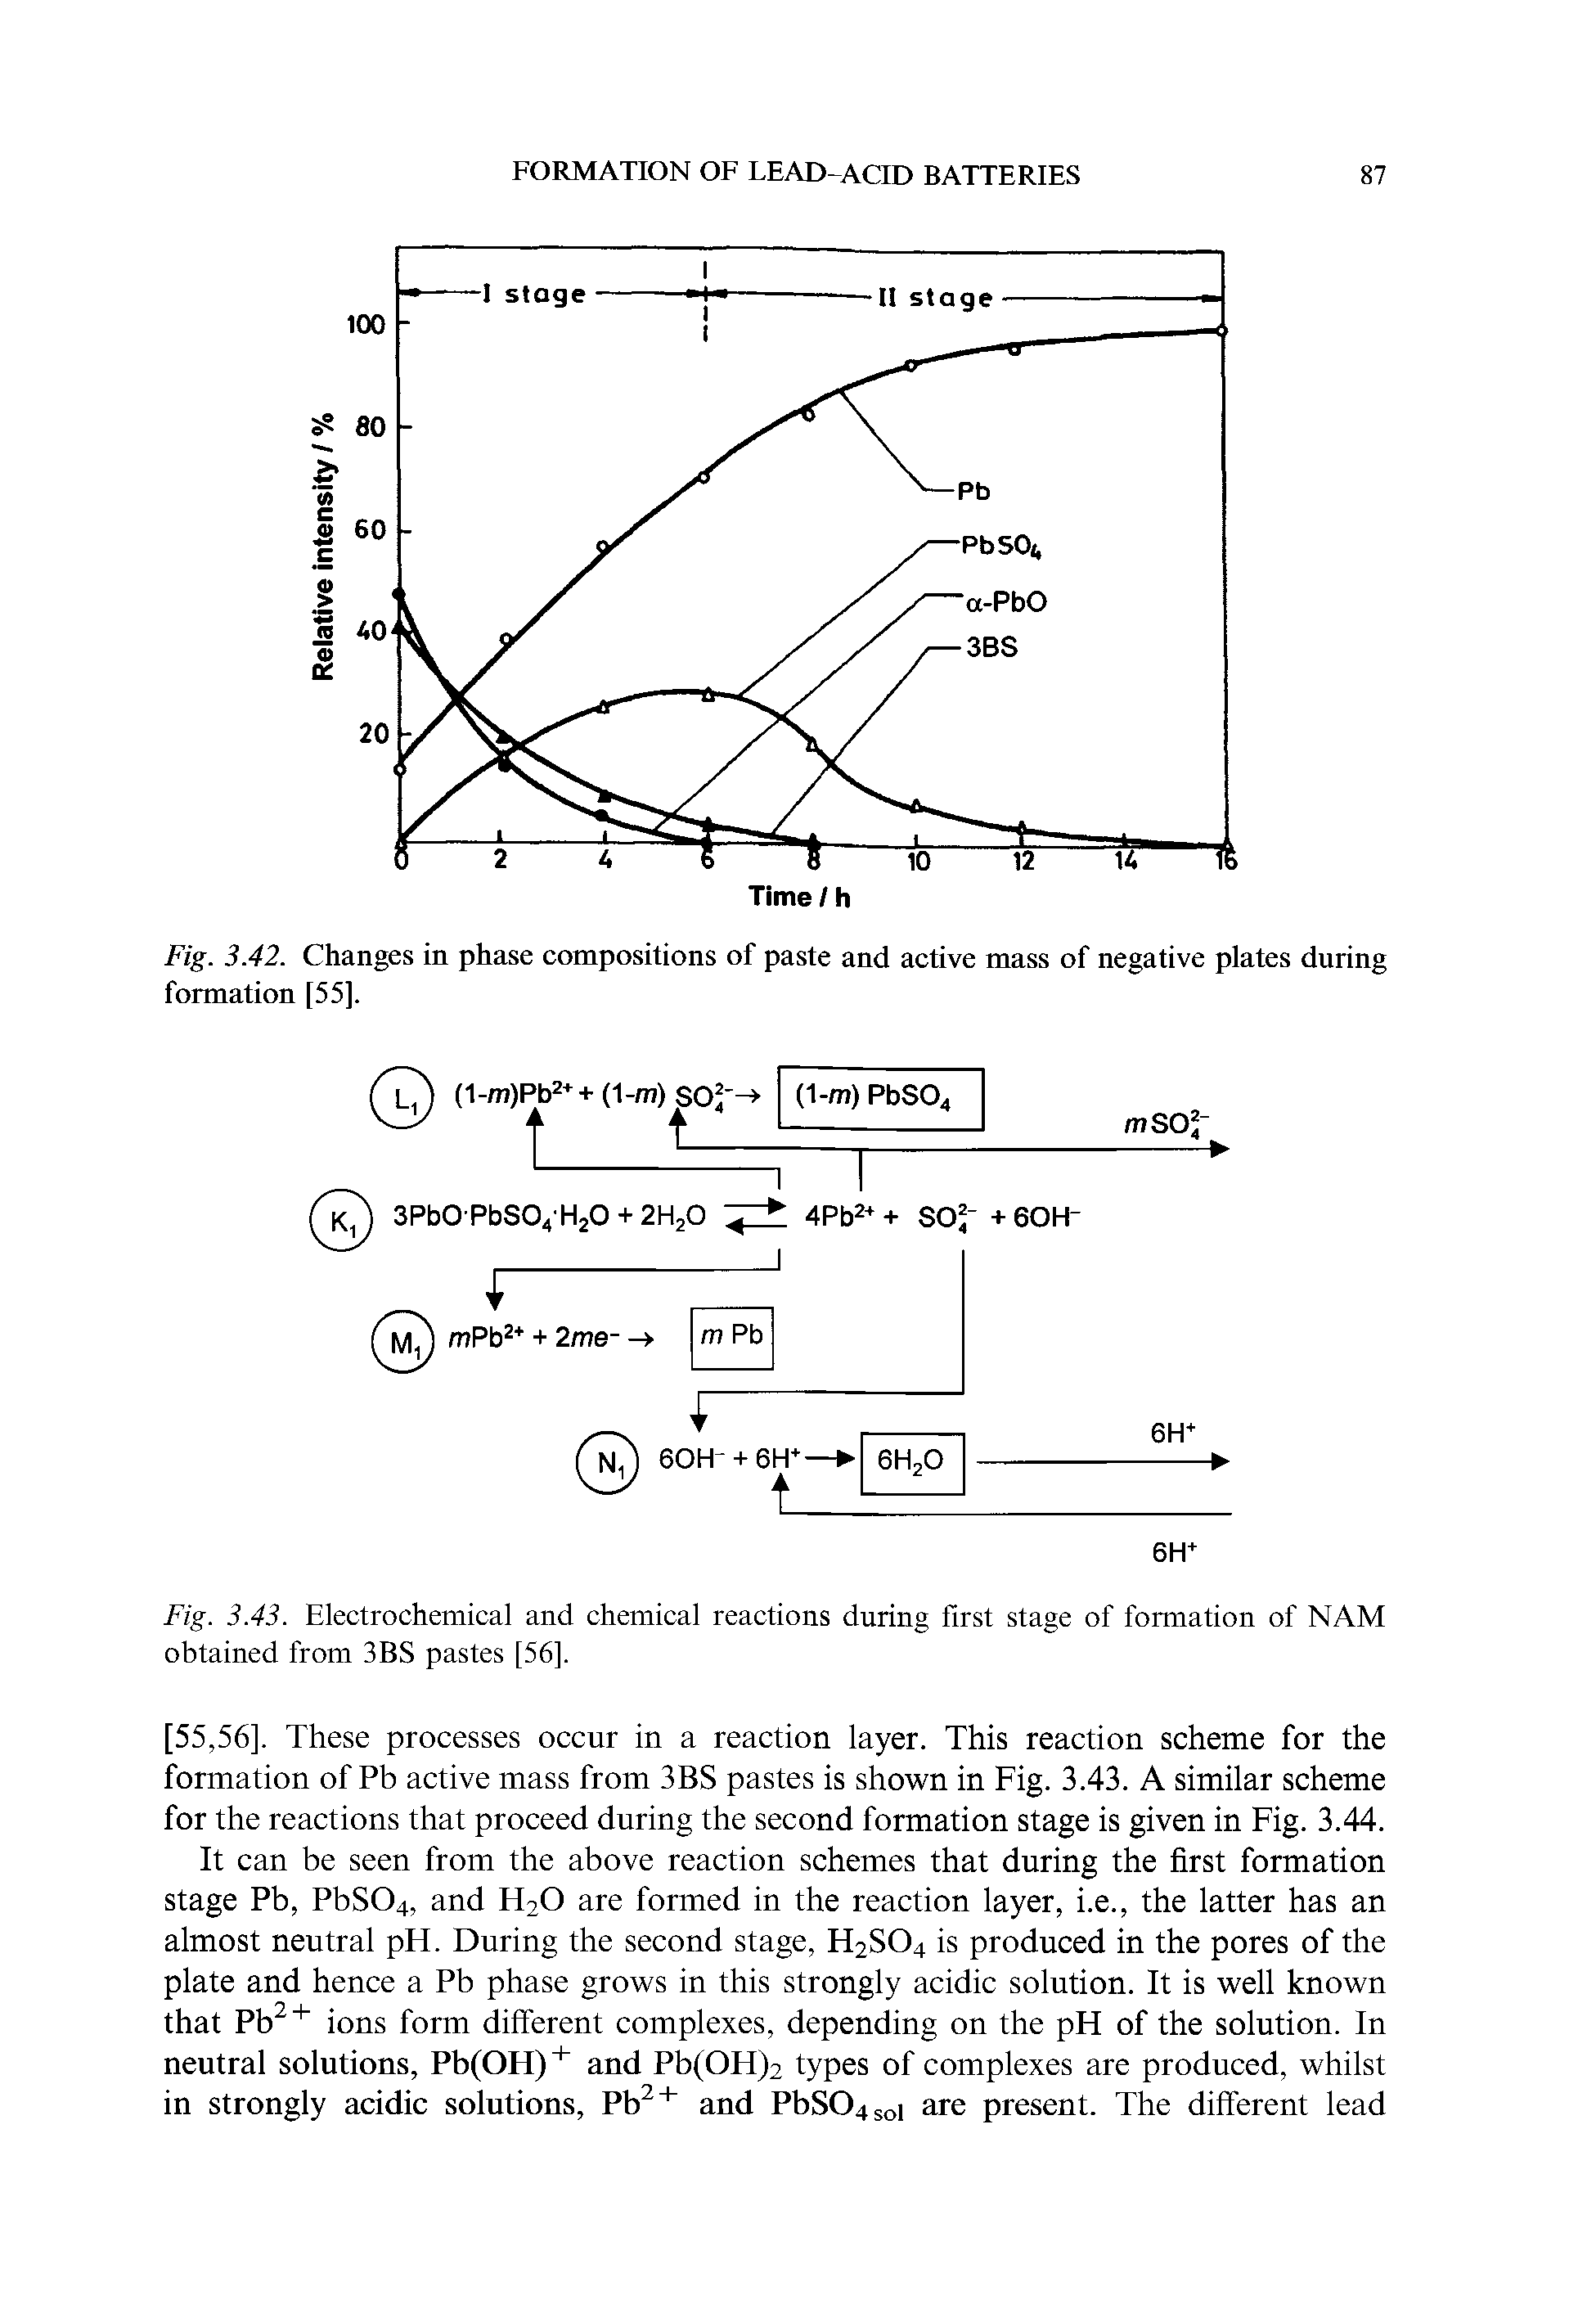 Fig. 3.42. Changes in phase compositions of paste and active mass of negative plates during formation [55].